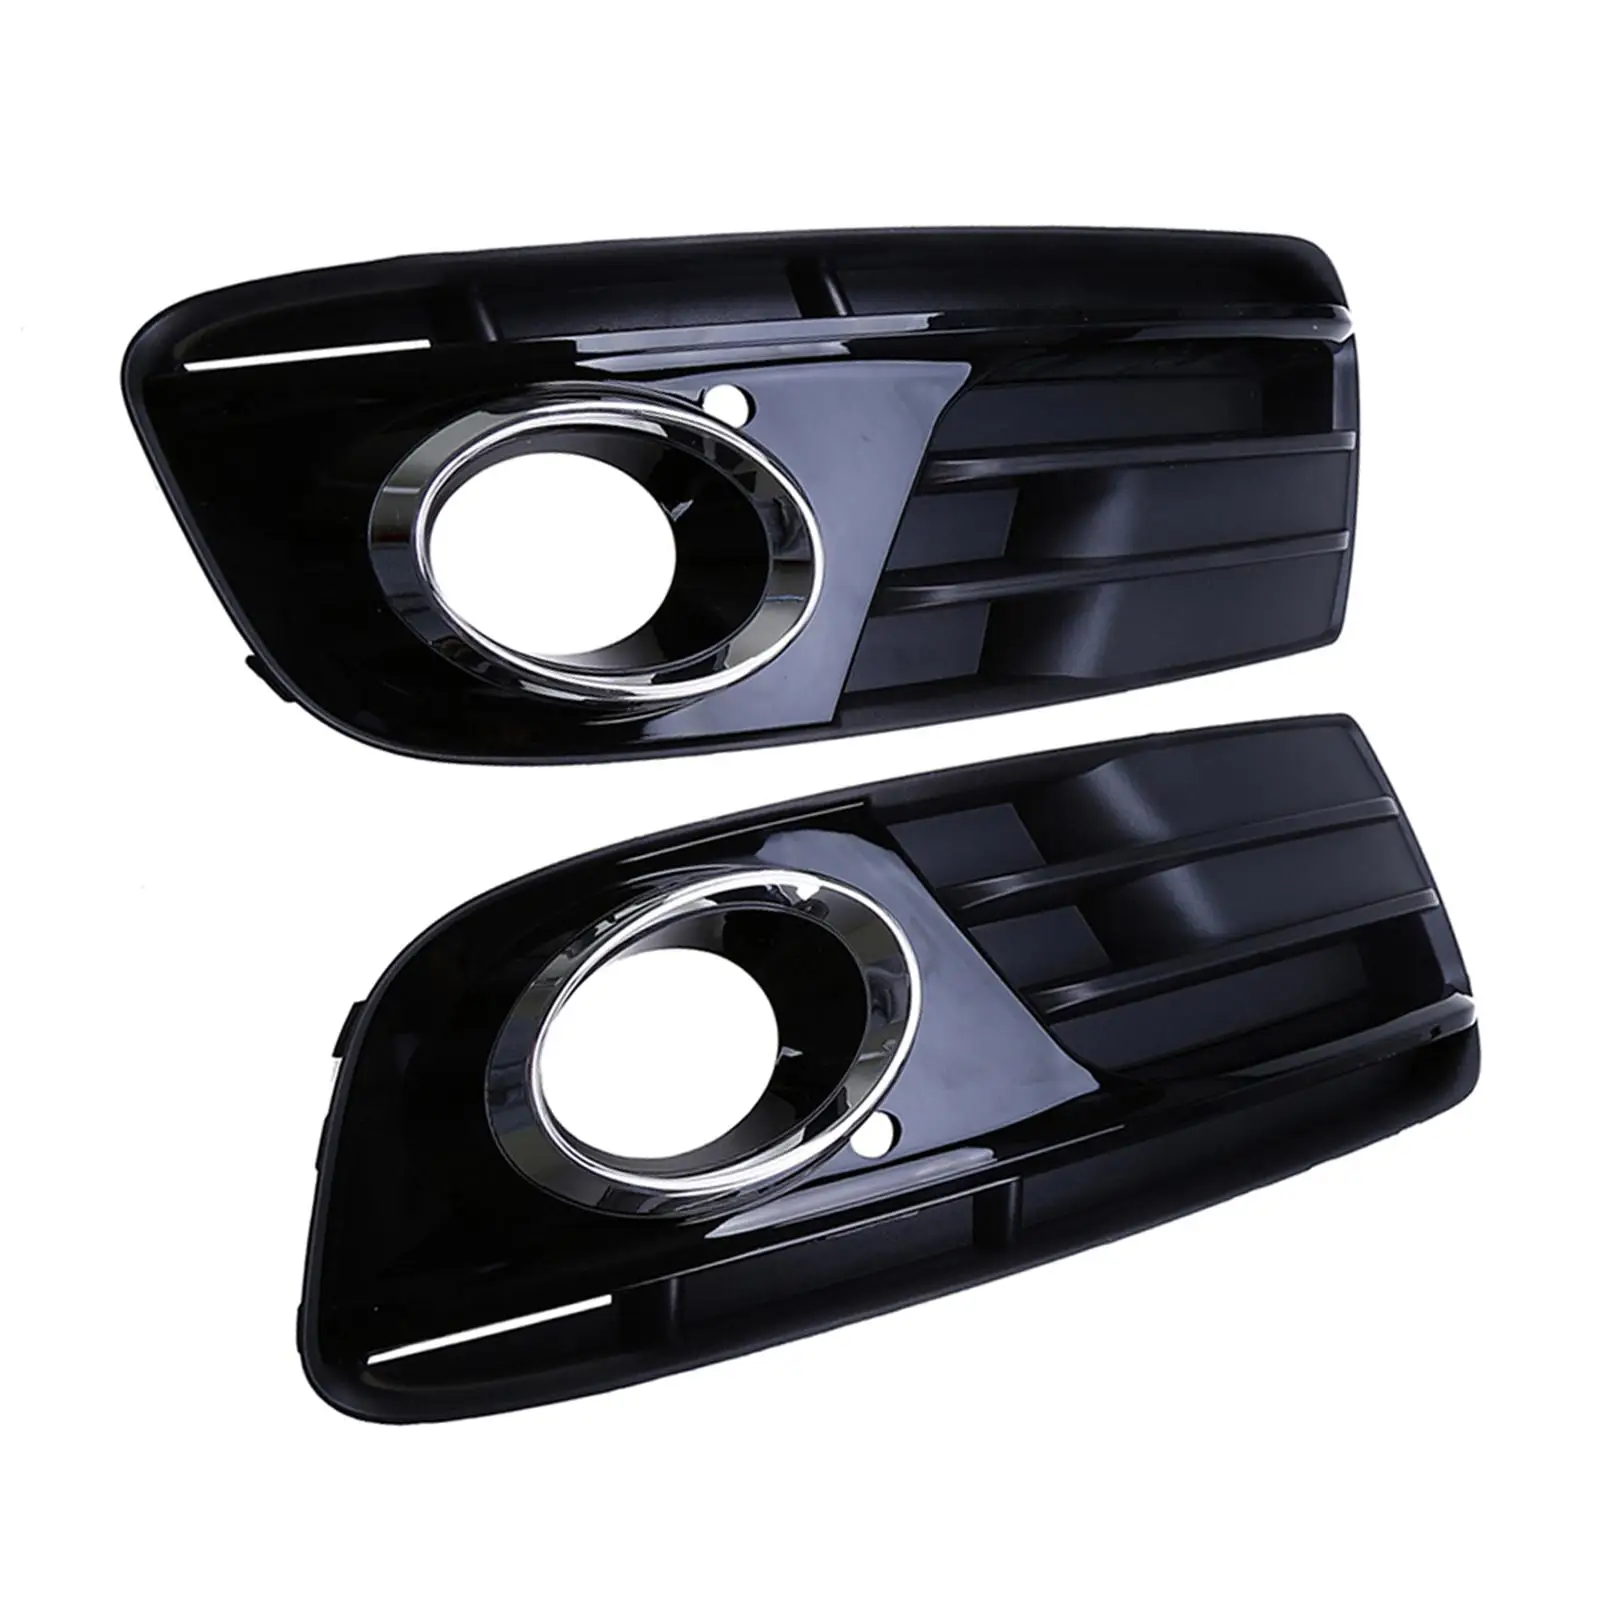 Fog Light Cover Grill Auto Direct Replaces Easy to Install Durable Professional Accessory for Audi Q5 2013-2016